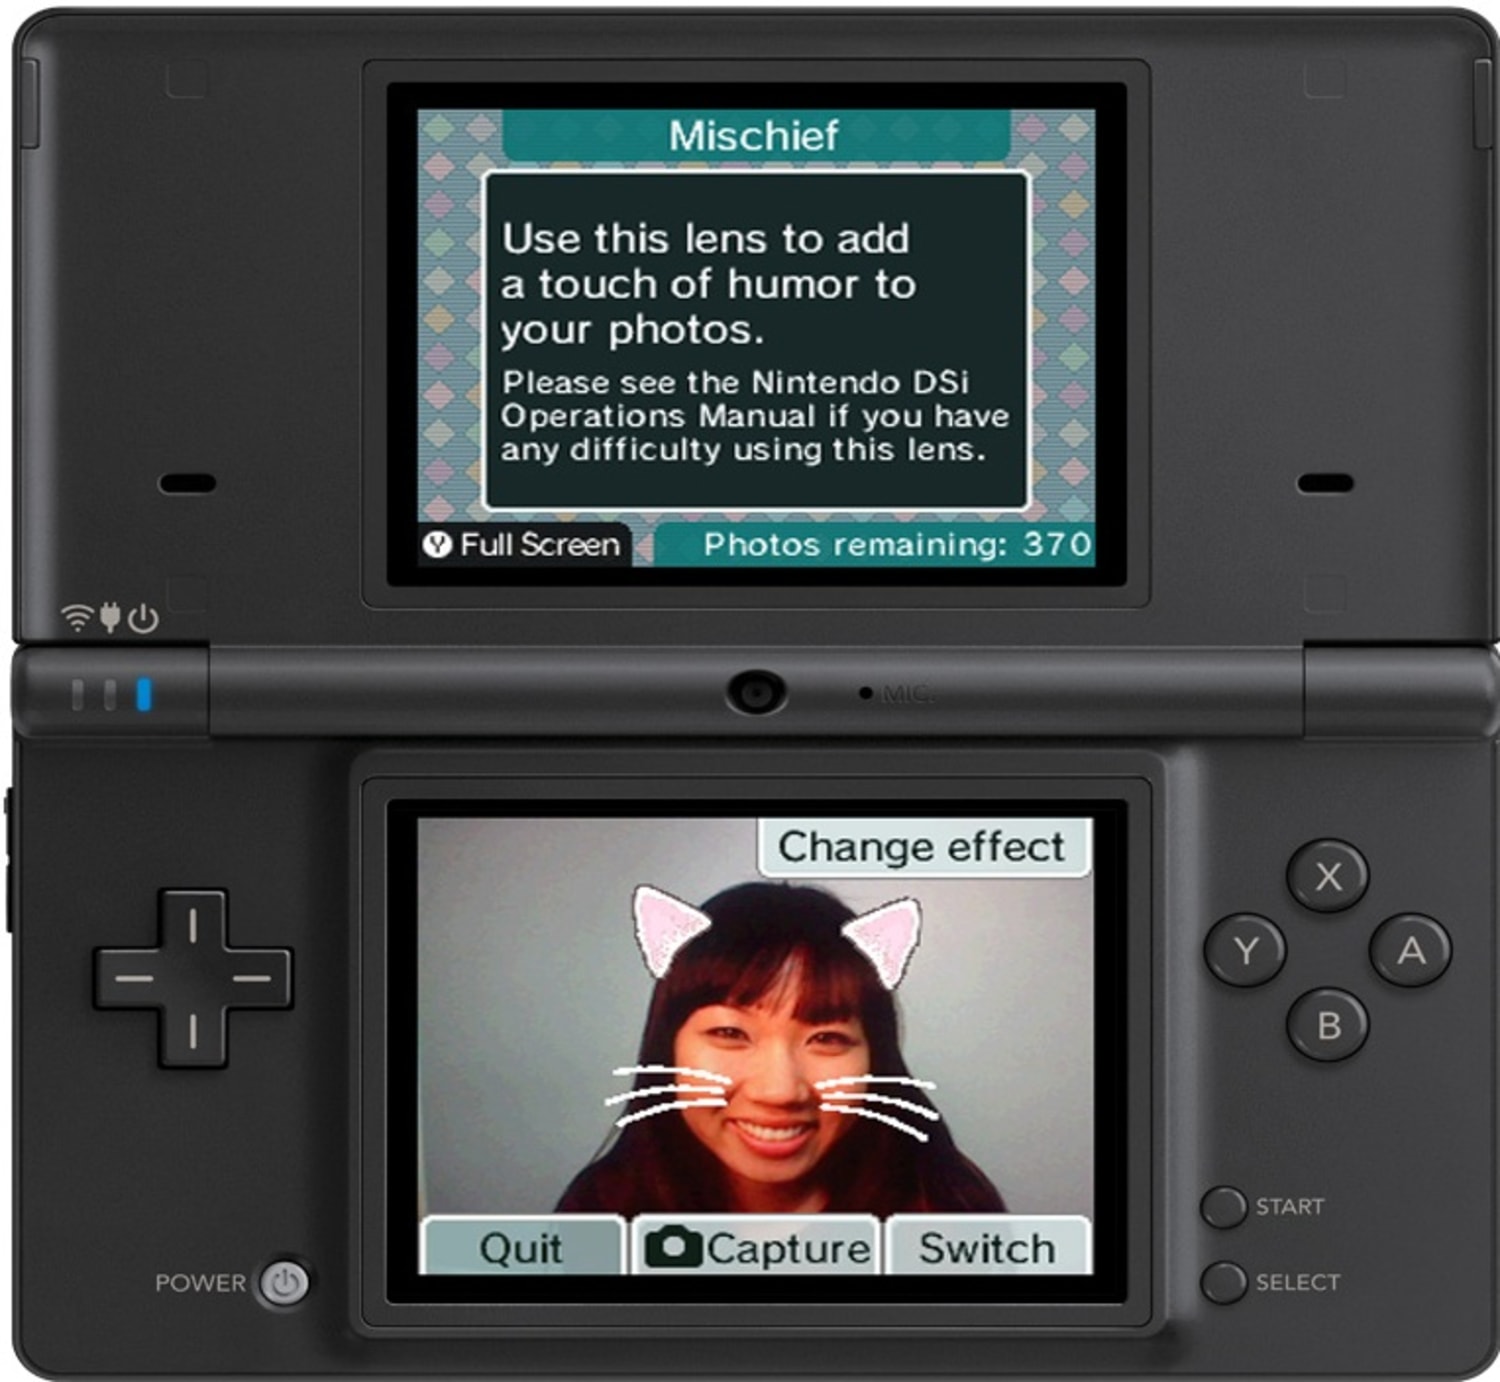 Preteens think Nintendo DSi is — will you?